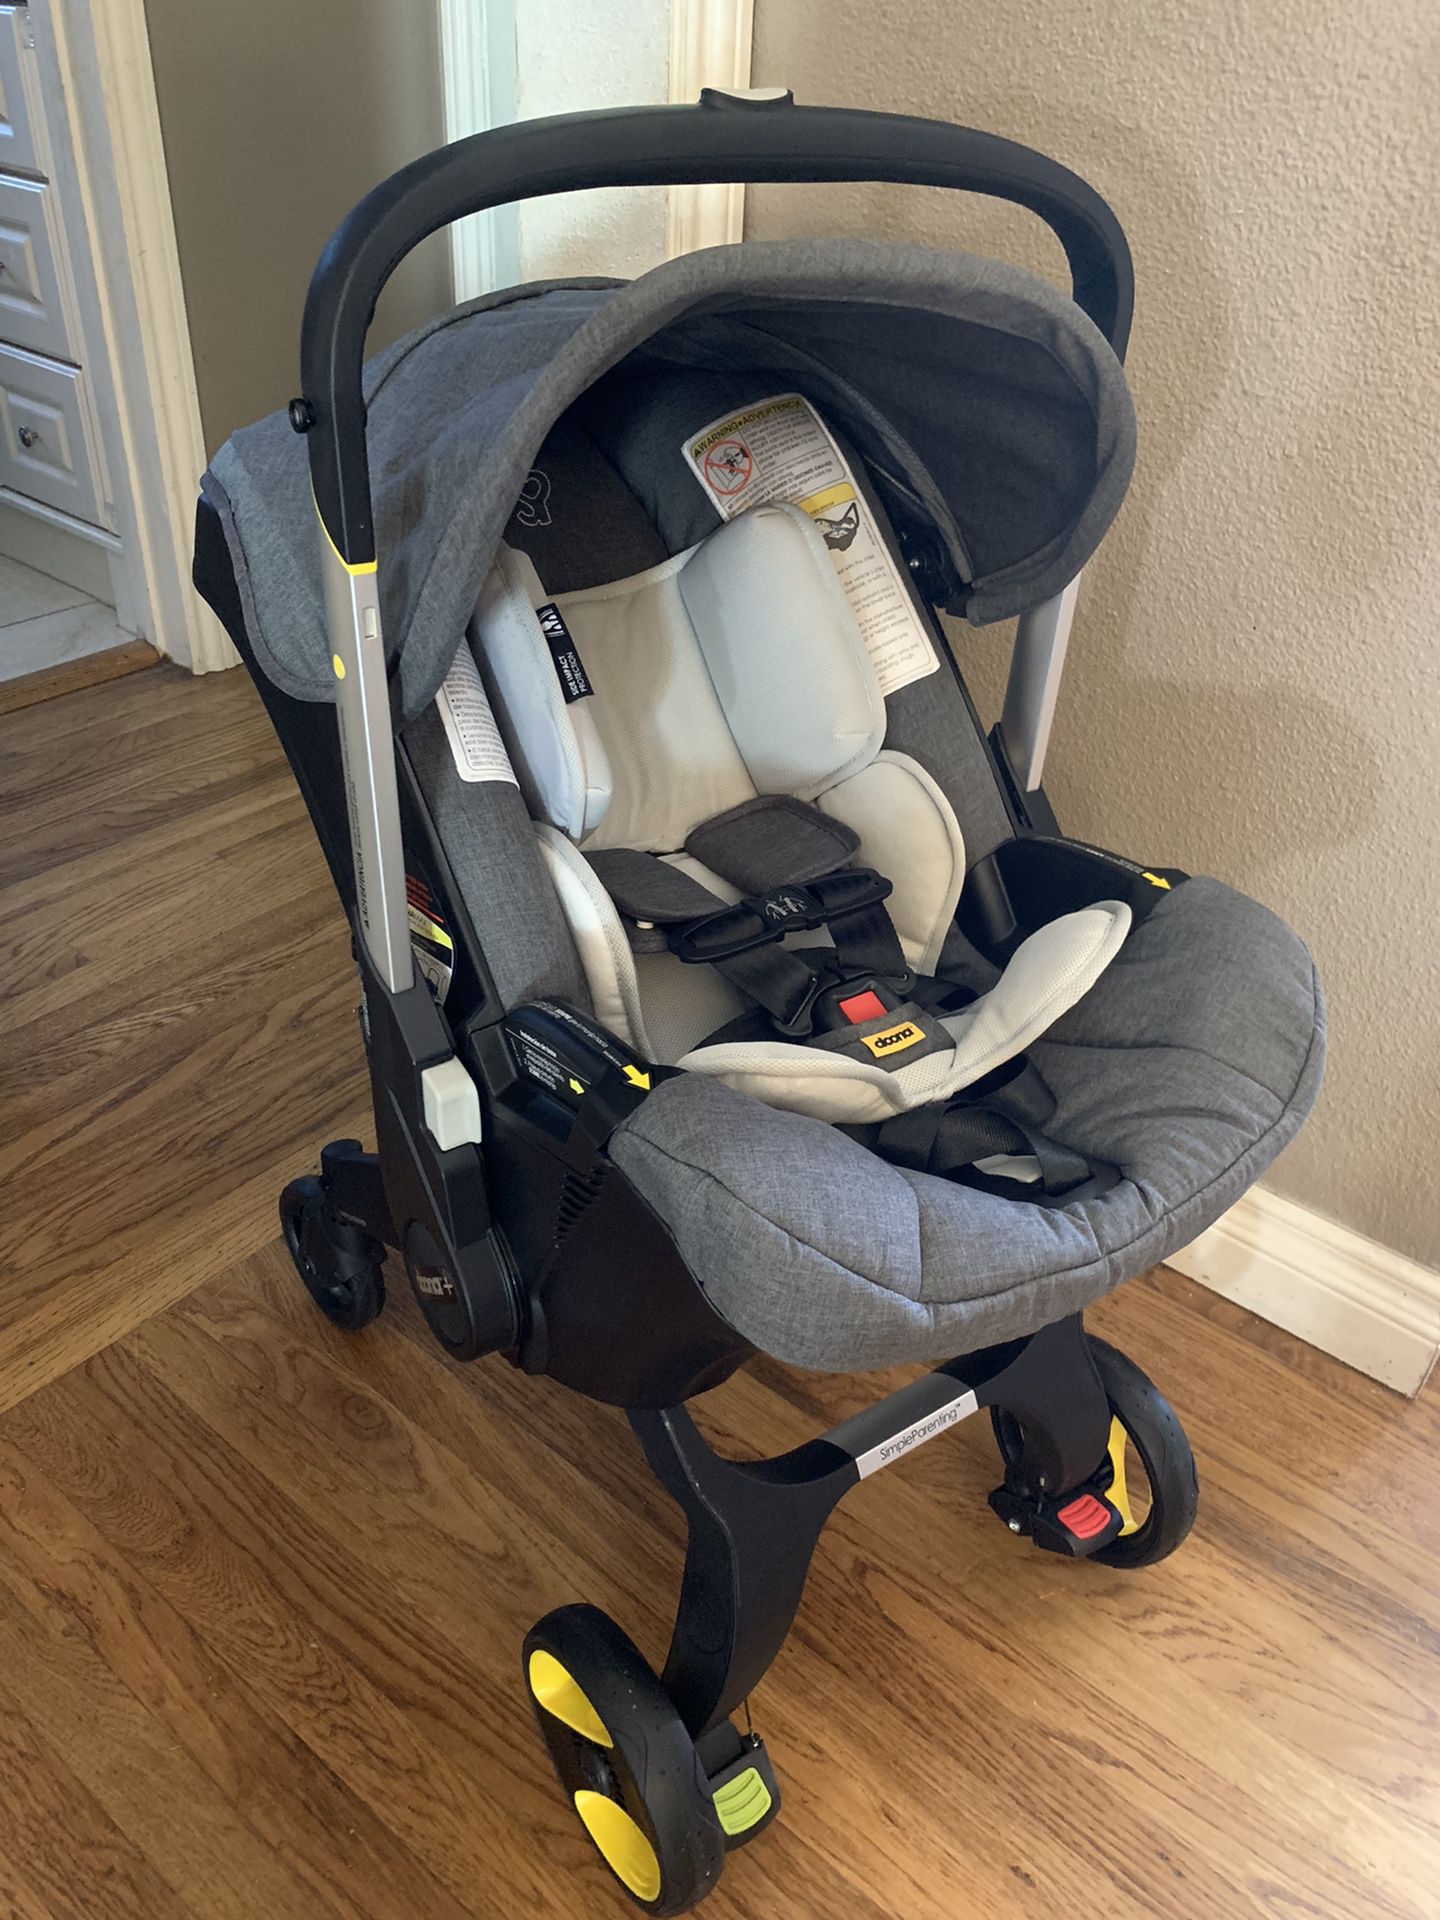 Doona Car seat/stroller and base